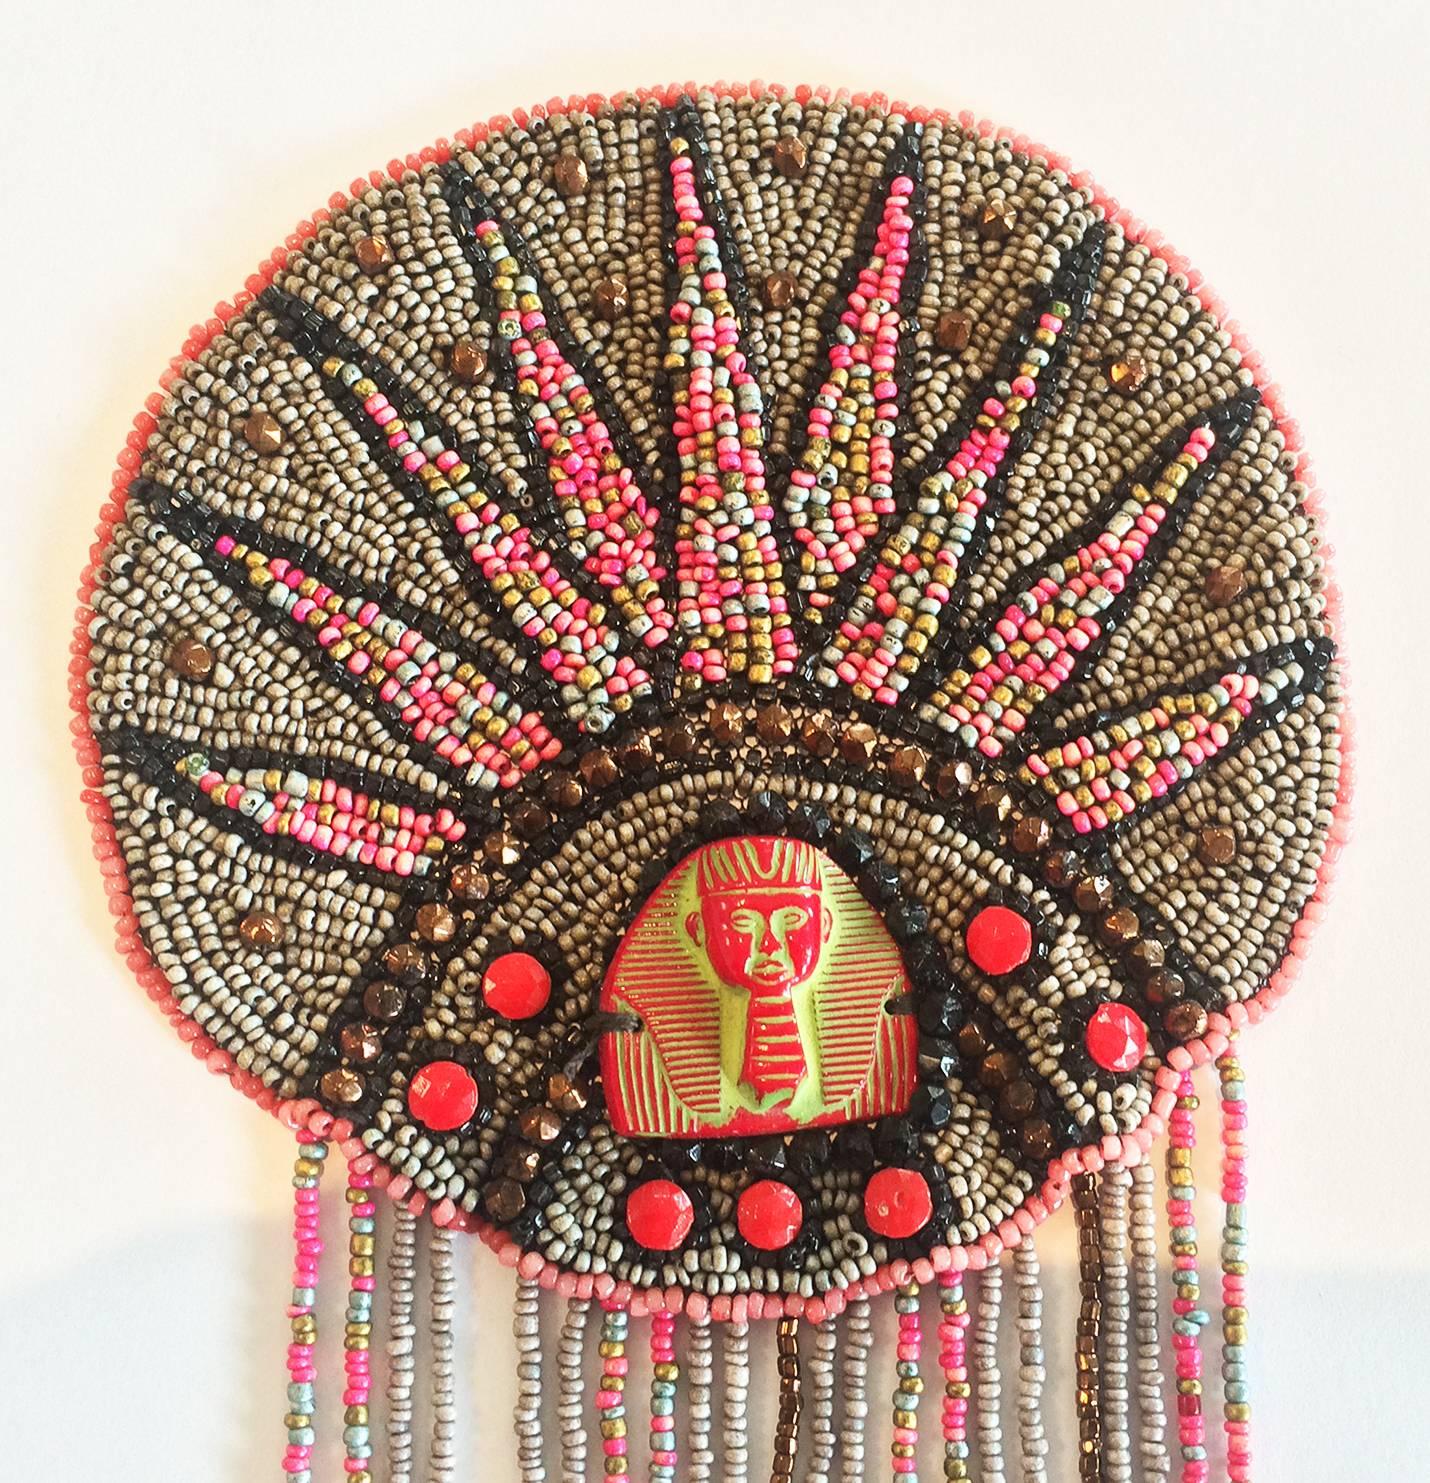 Art Deco, Amazing, Egyptian Revival Beaded Dress Piece. Designed as an “add-on” contrast for a typical Deco Evening Dress, the long strands of beads swaying with movement, maybe while doing the “Charleston”, or just while walking. The centre piece